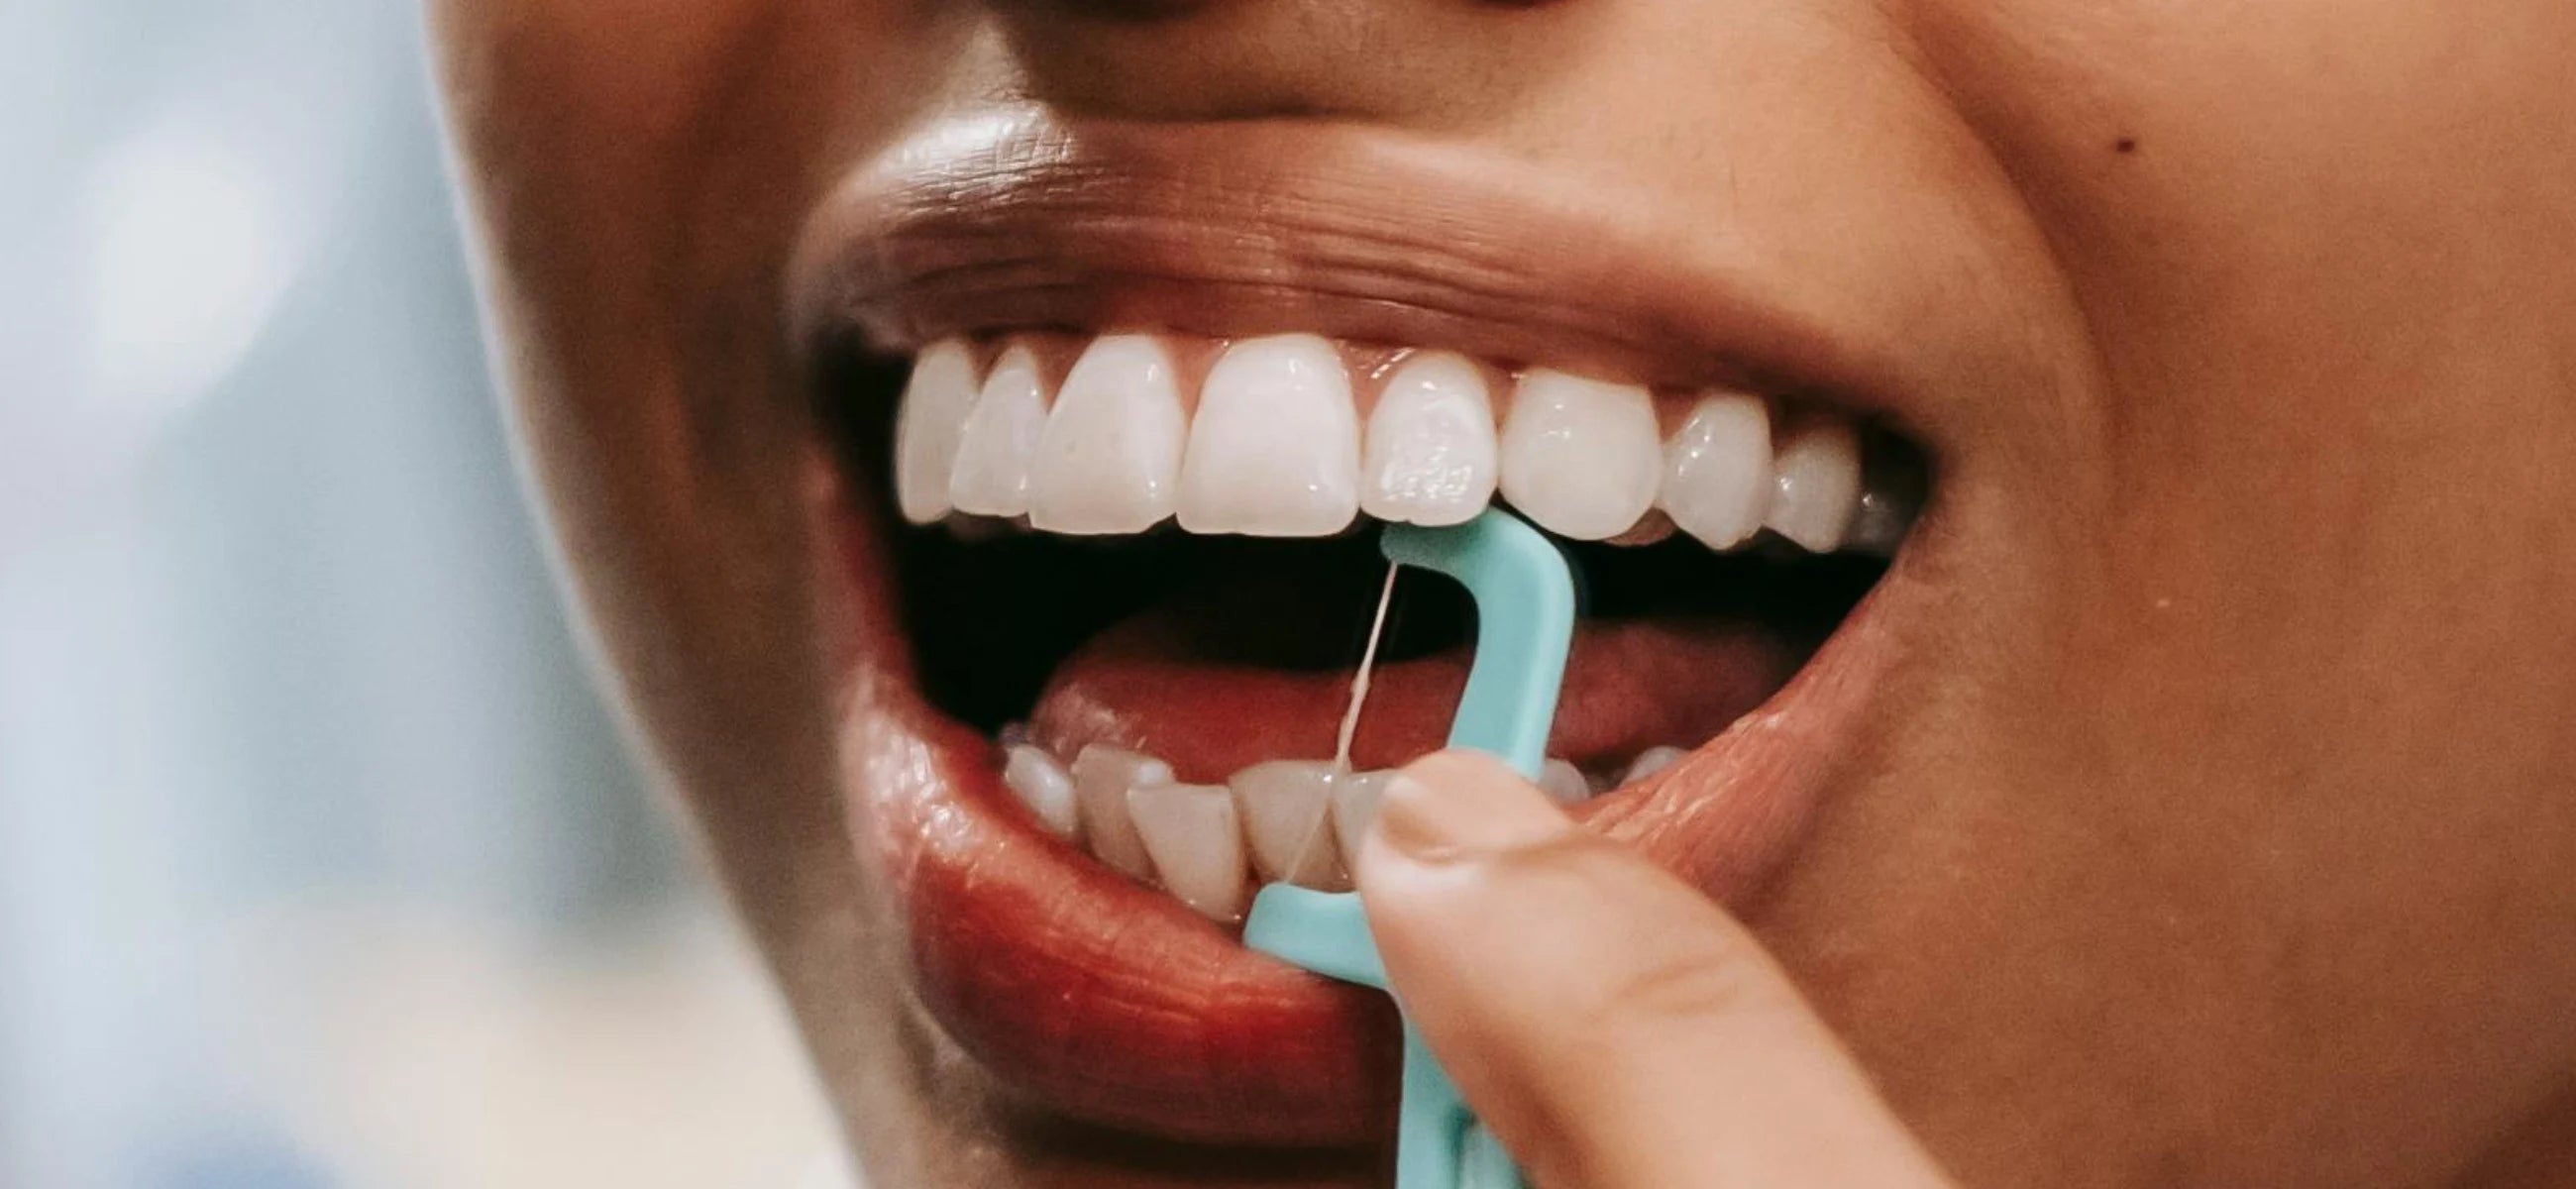 A step-by-step tutorial on how to use dental floss correctly